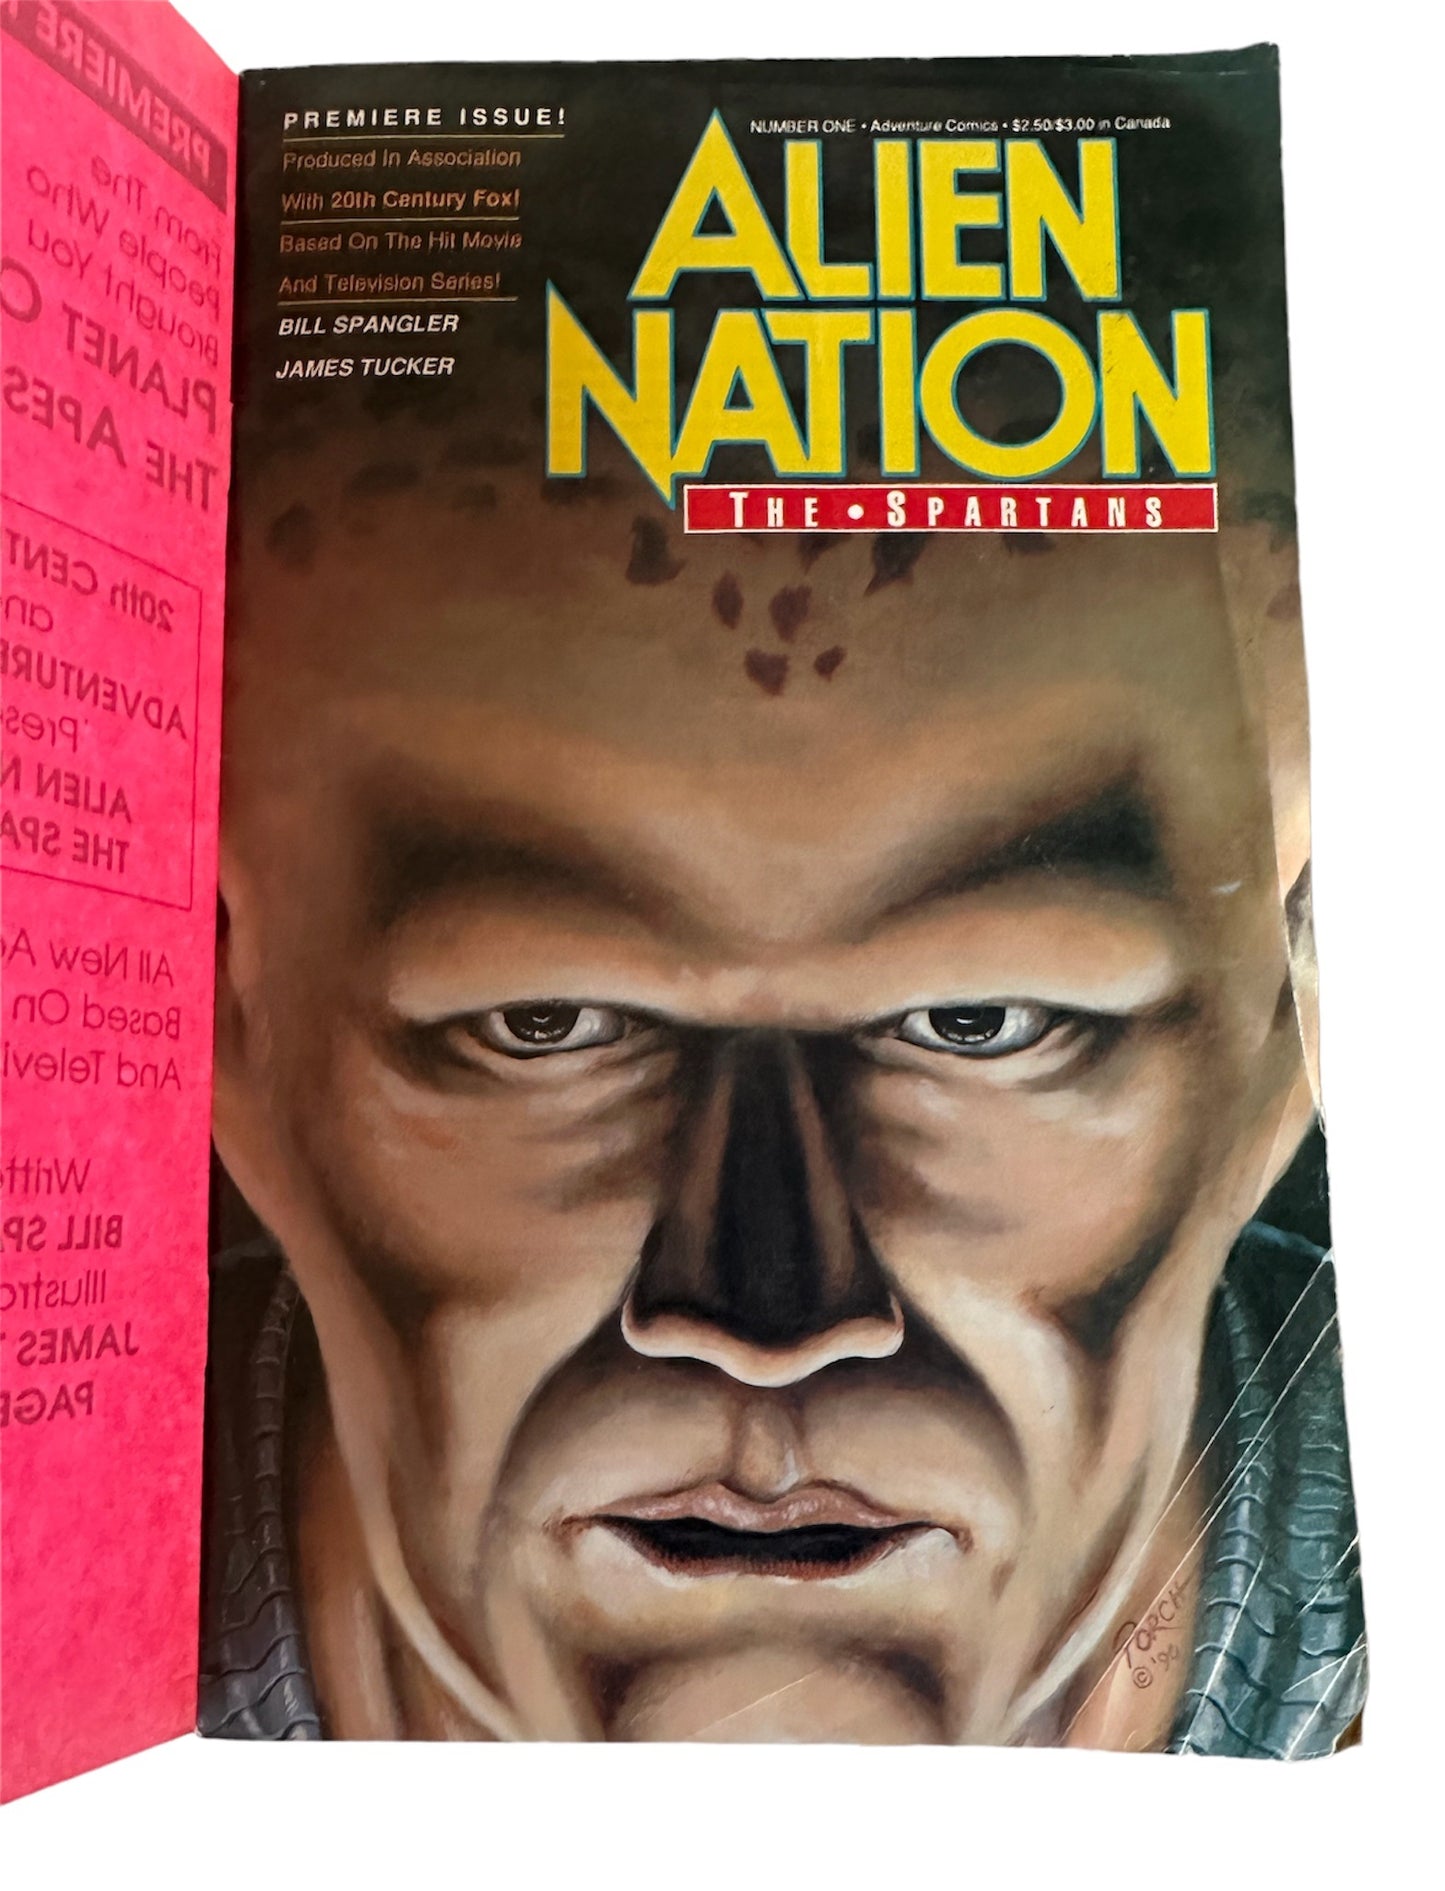 Vintage 1990 Adventure Comics - Alien Nation The Spartons Comic Issue Number 1 Premiere Issue - Very Good Condition Vintage Comic